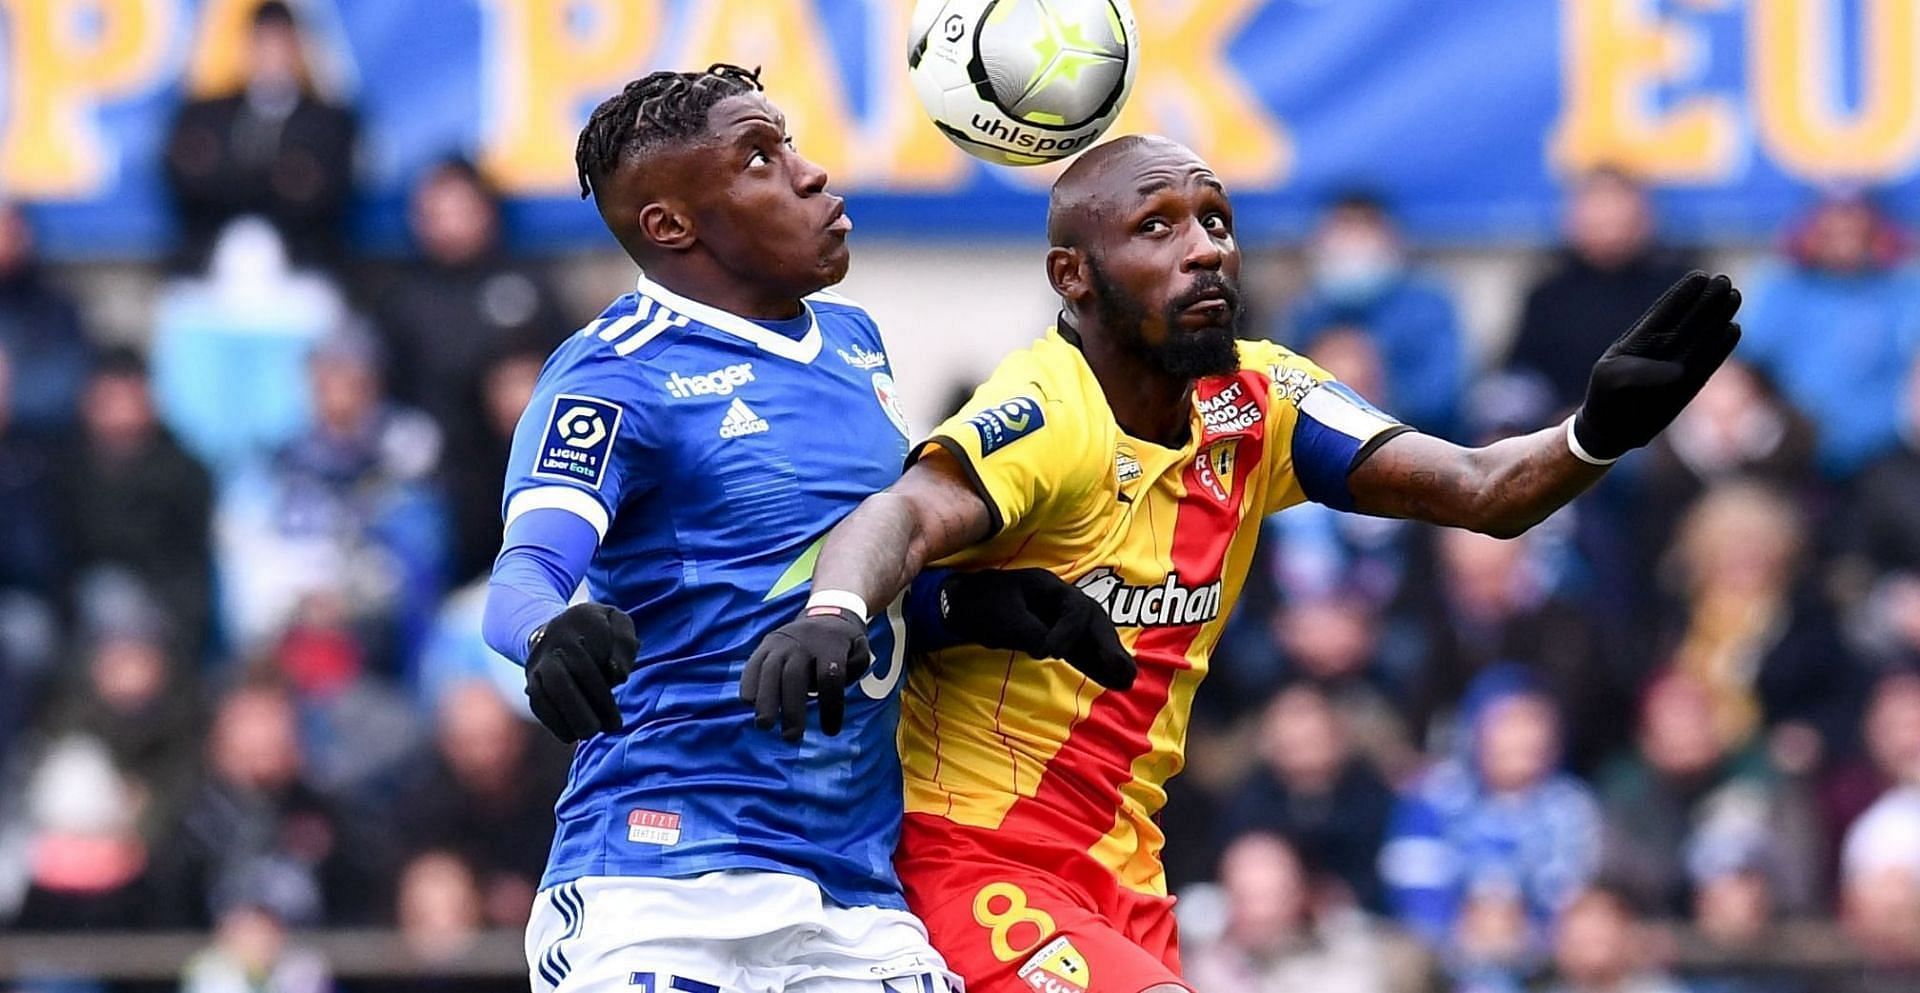 Strasbourg and Lens will square off in the Ligue 1 on Friday